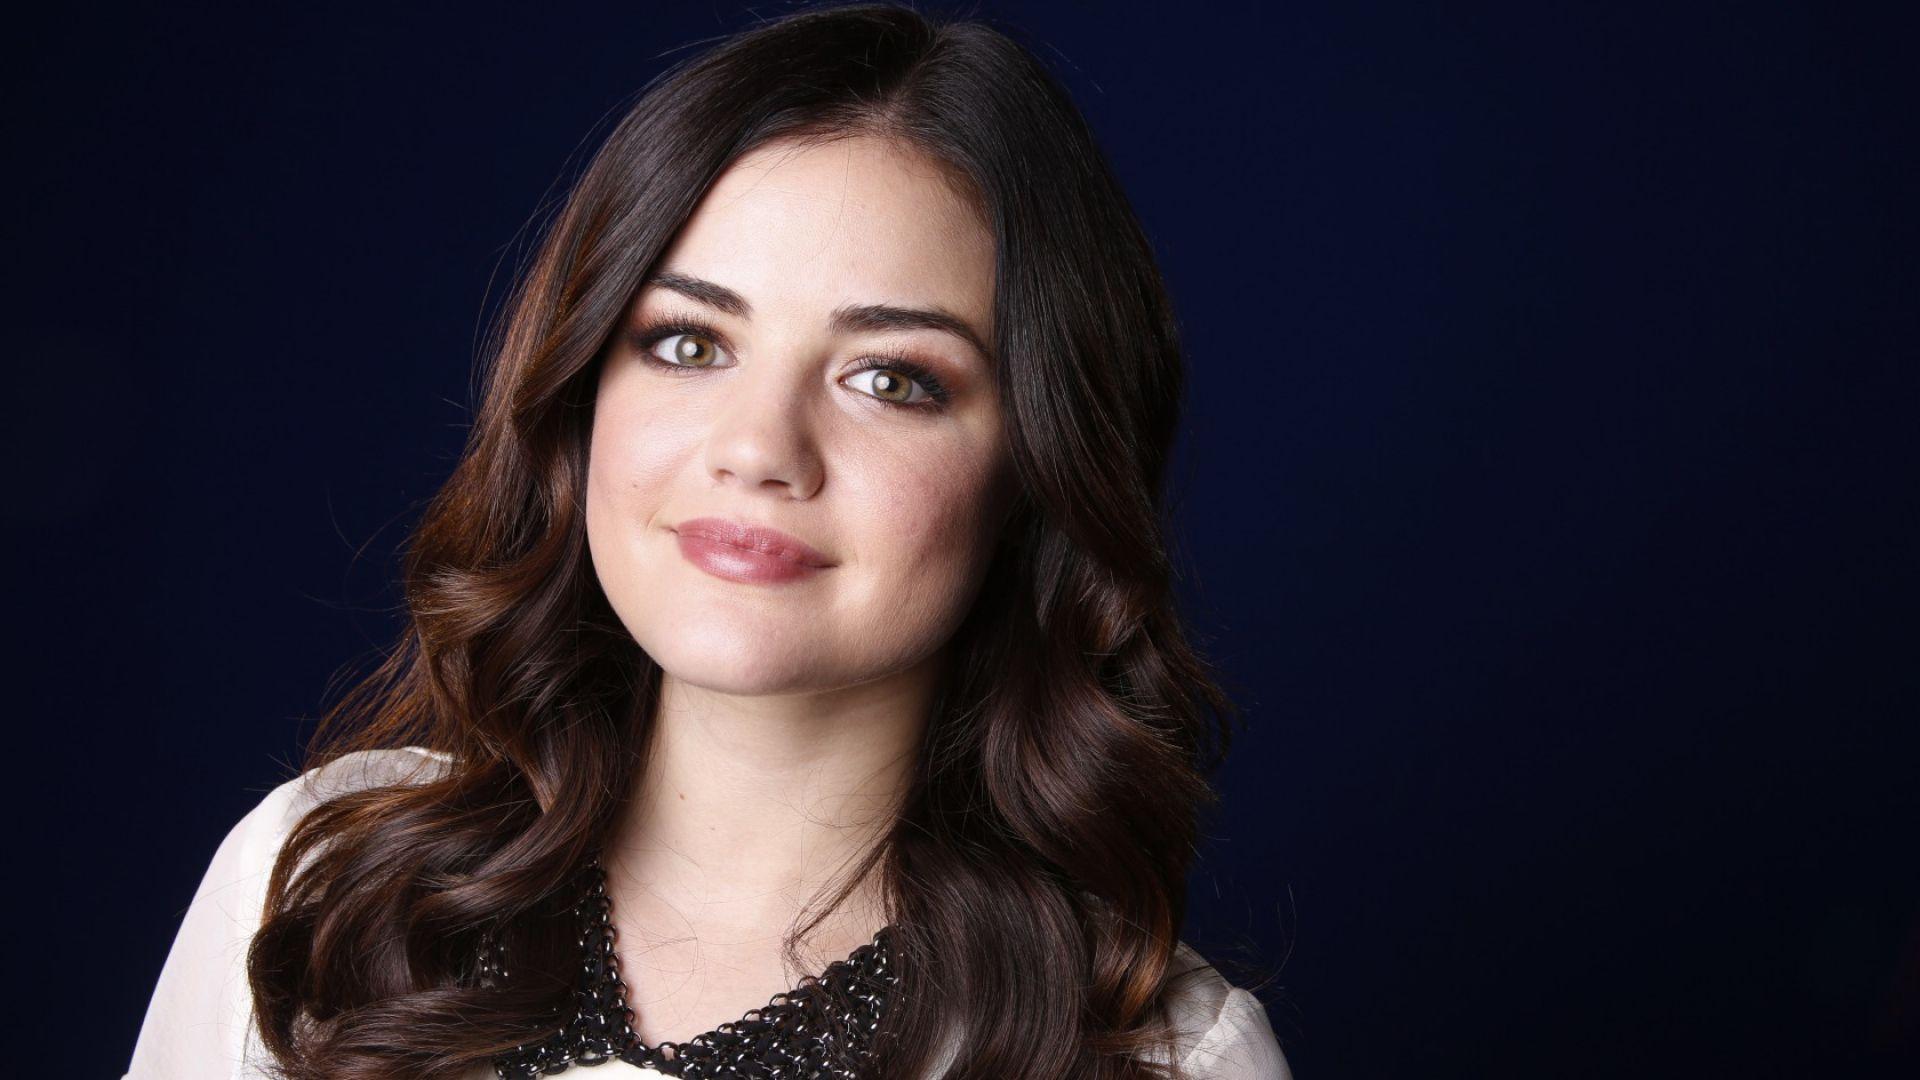 Lucy Hale Wallpaper High Quality